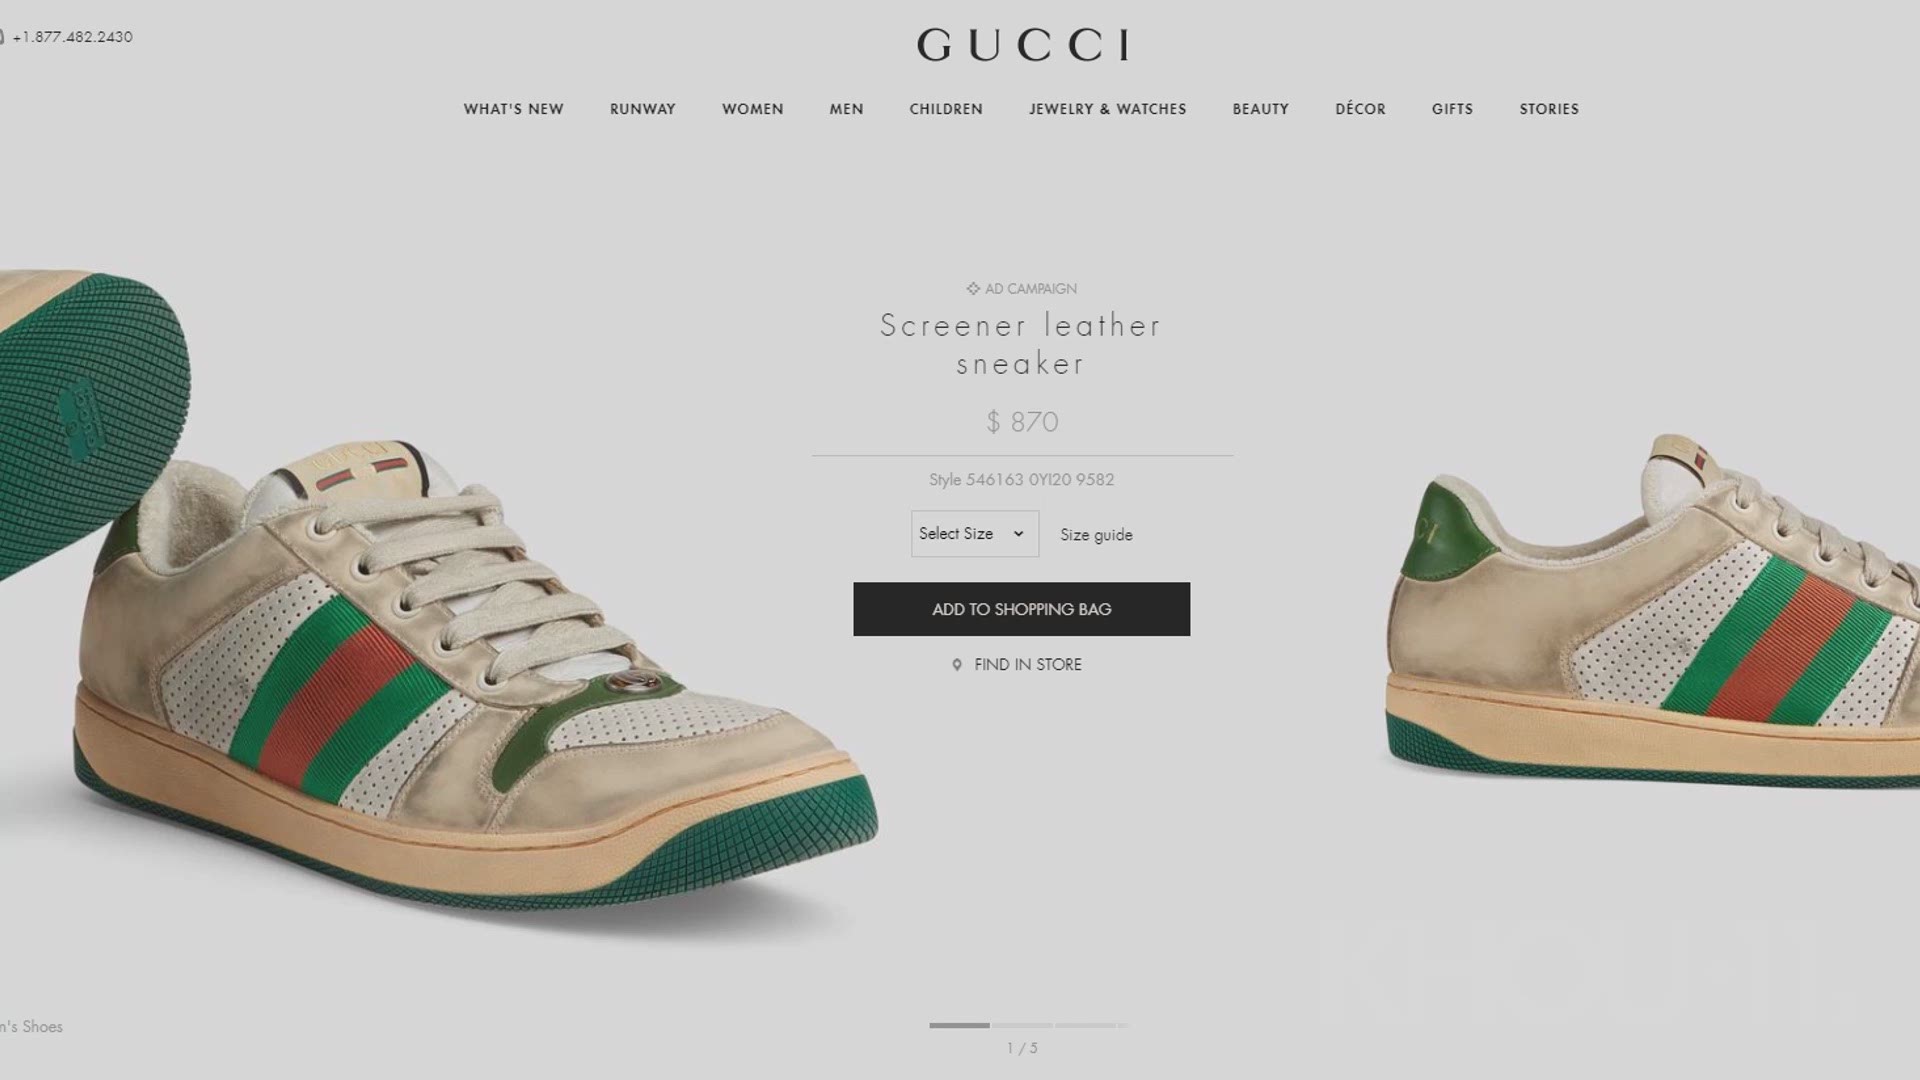 Gucci’s website is currently selling the “Screener” leather sneaker for $870. No surprise on the cost, that’s Gucci for you. But what is surprising is the white leather already comes with a stained, off white look. Even the shoe laces look dirty. And the shoes have scuff marks.